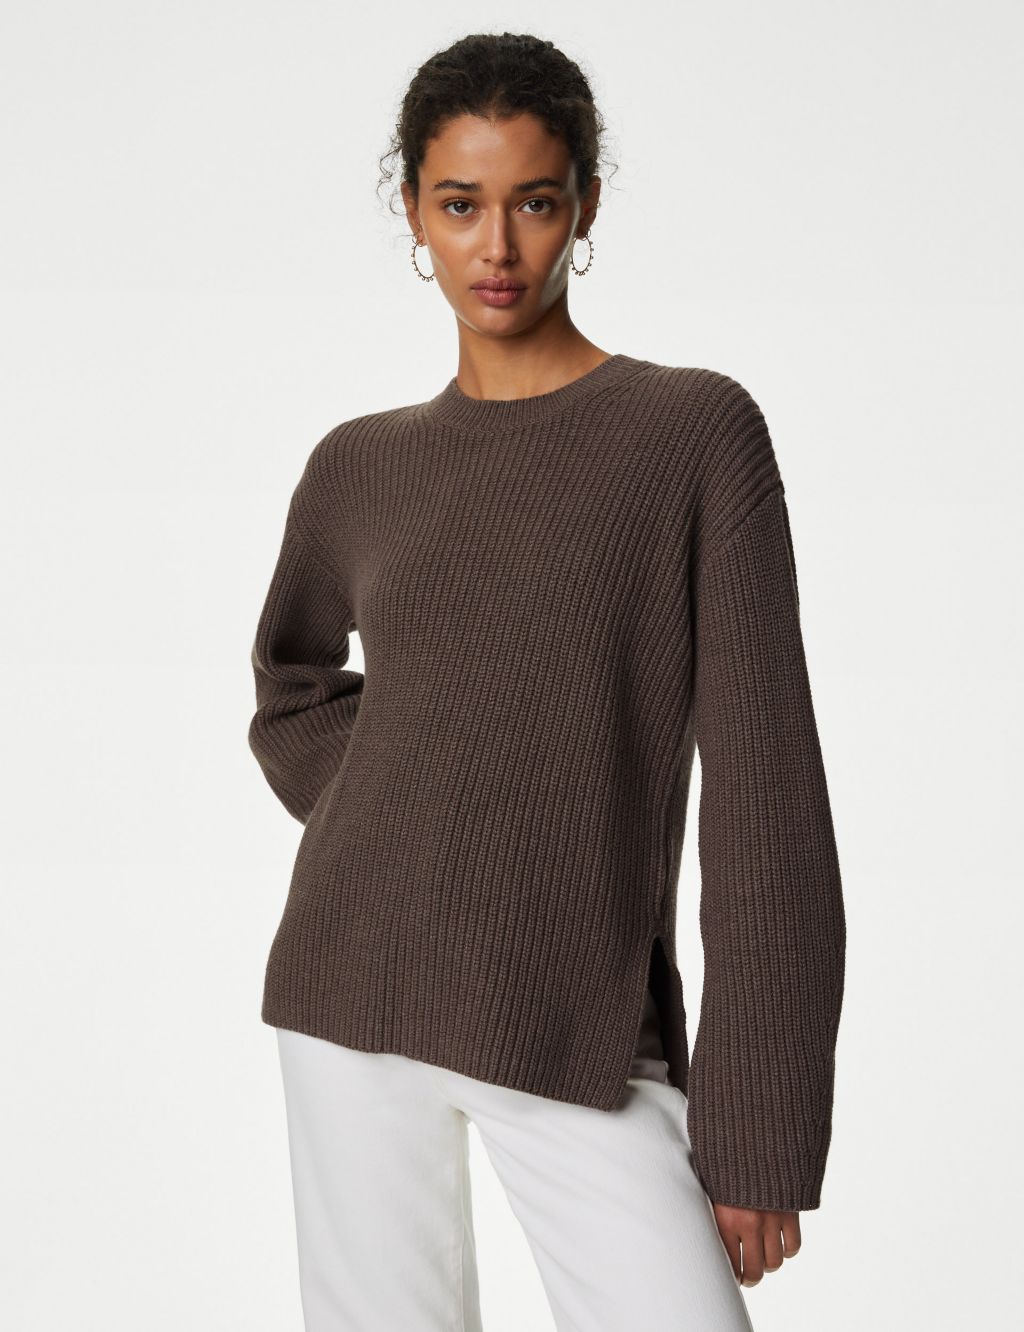 Cotton Rich Ribbed Jumper with Merino Wool image 1